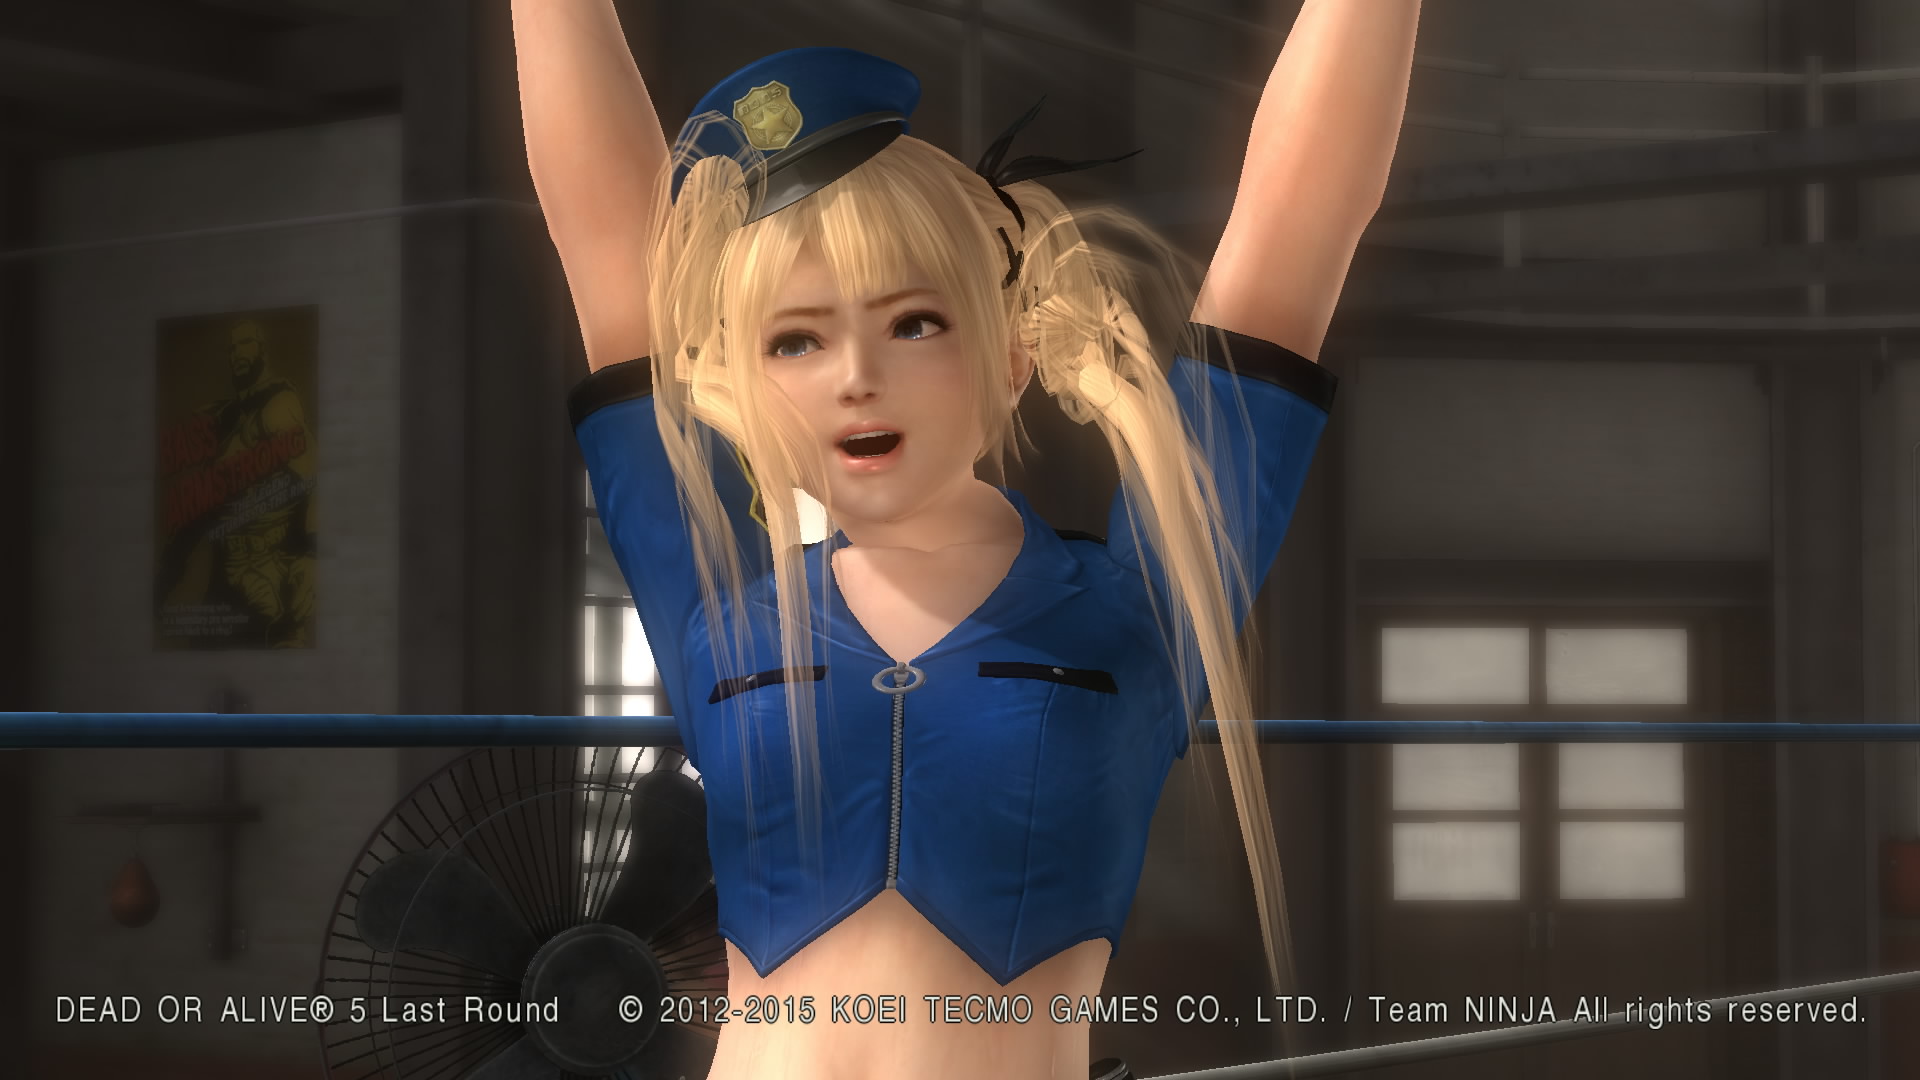 DEAD OR ALIVE 5 Last Round__2.jpg